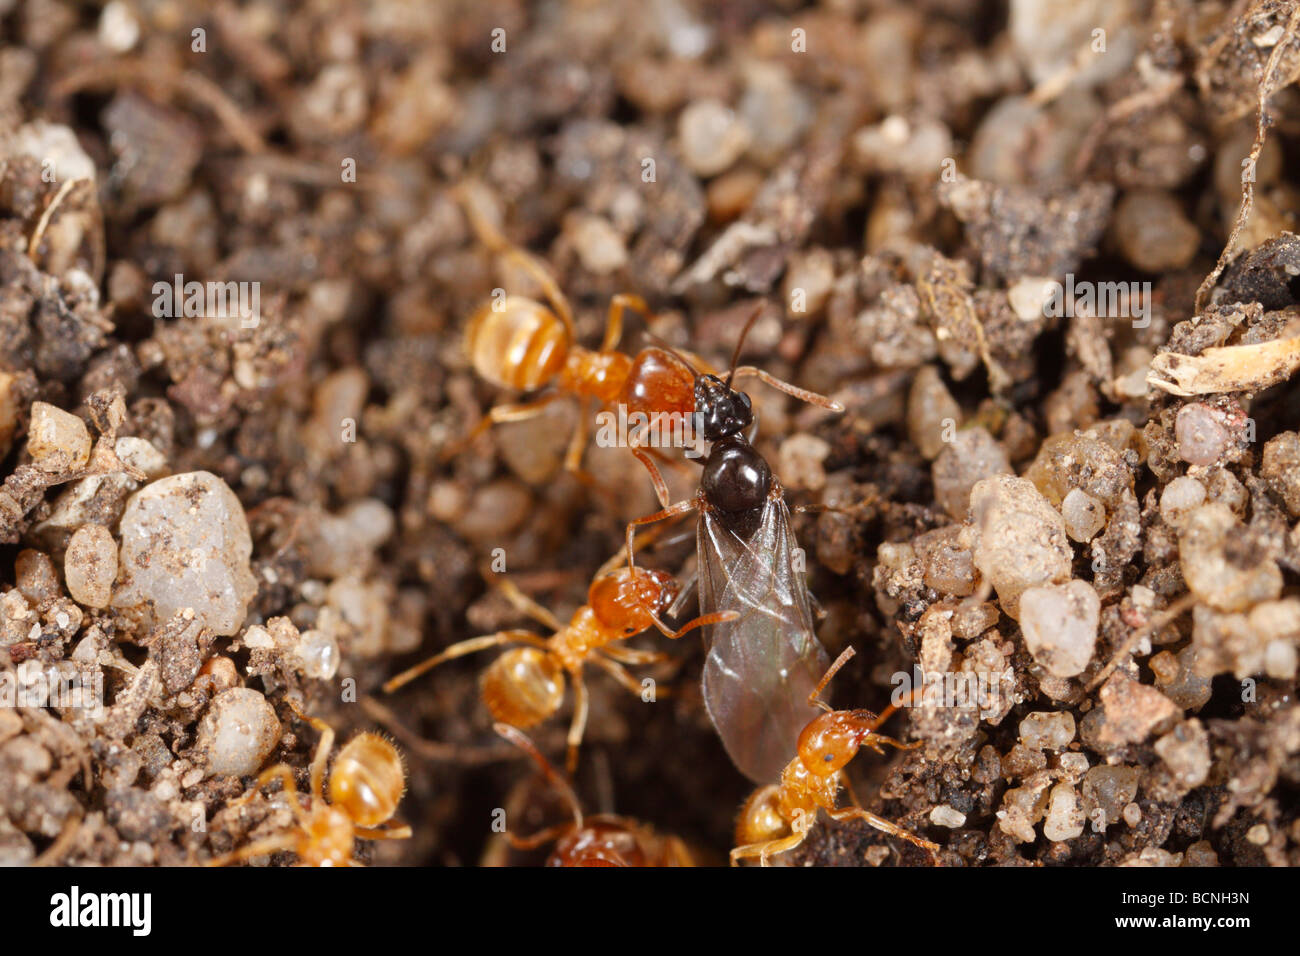 Lasius flavus, Yellow Meadow Ants, preparing the nest entrance for swarming. Workers and alates can be seen. Stock Photo